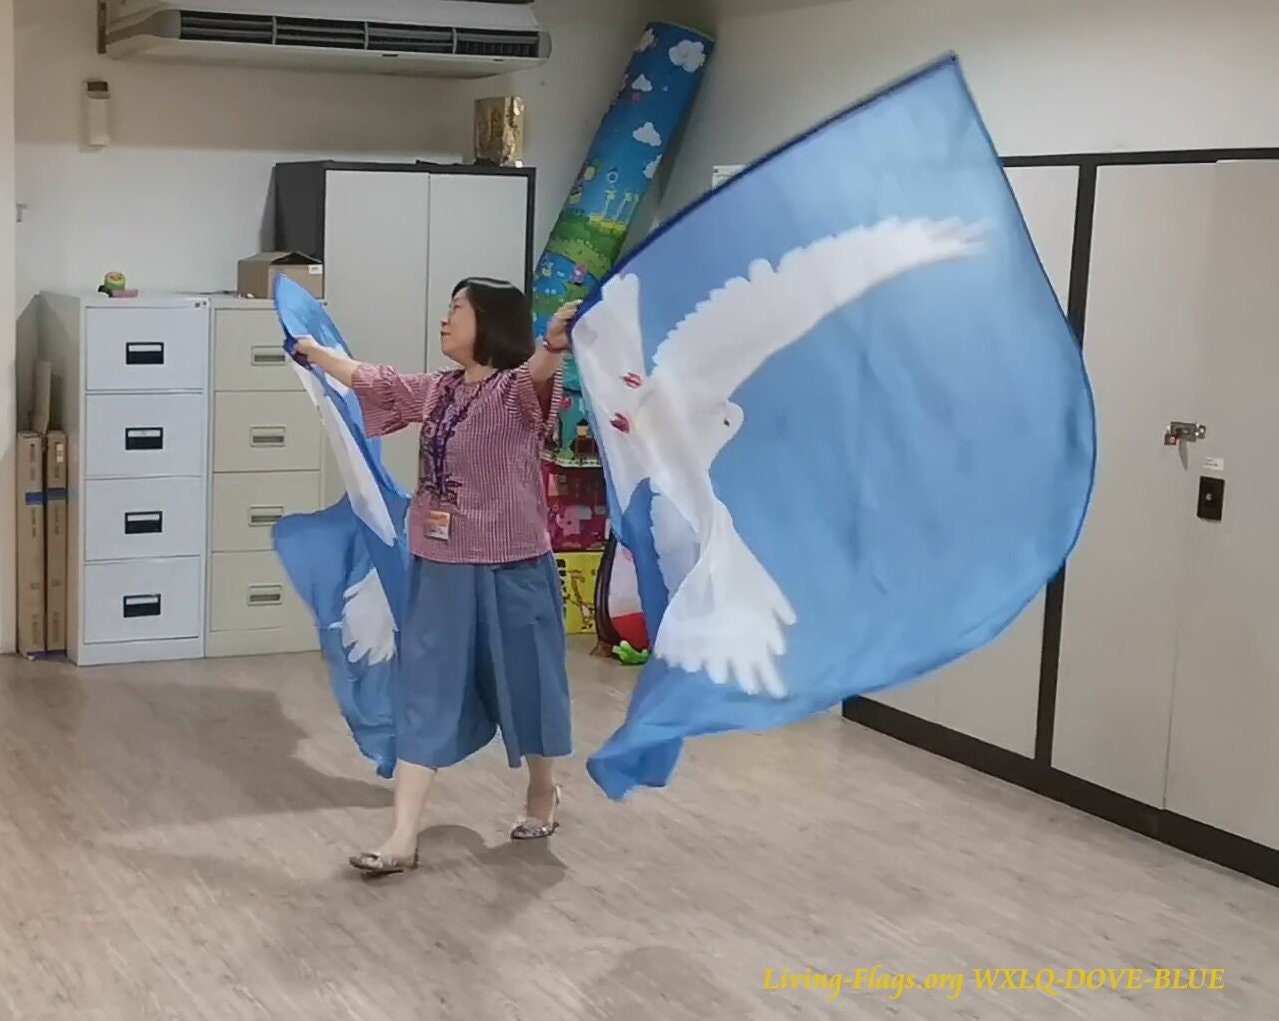 Buy 1 Get 1 FREE - Dove (holy Spirit) Heavenly Blue - Printed Habotai Silk  Wing Flags Wxl-quill